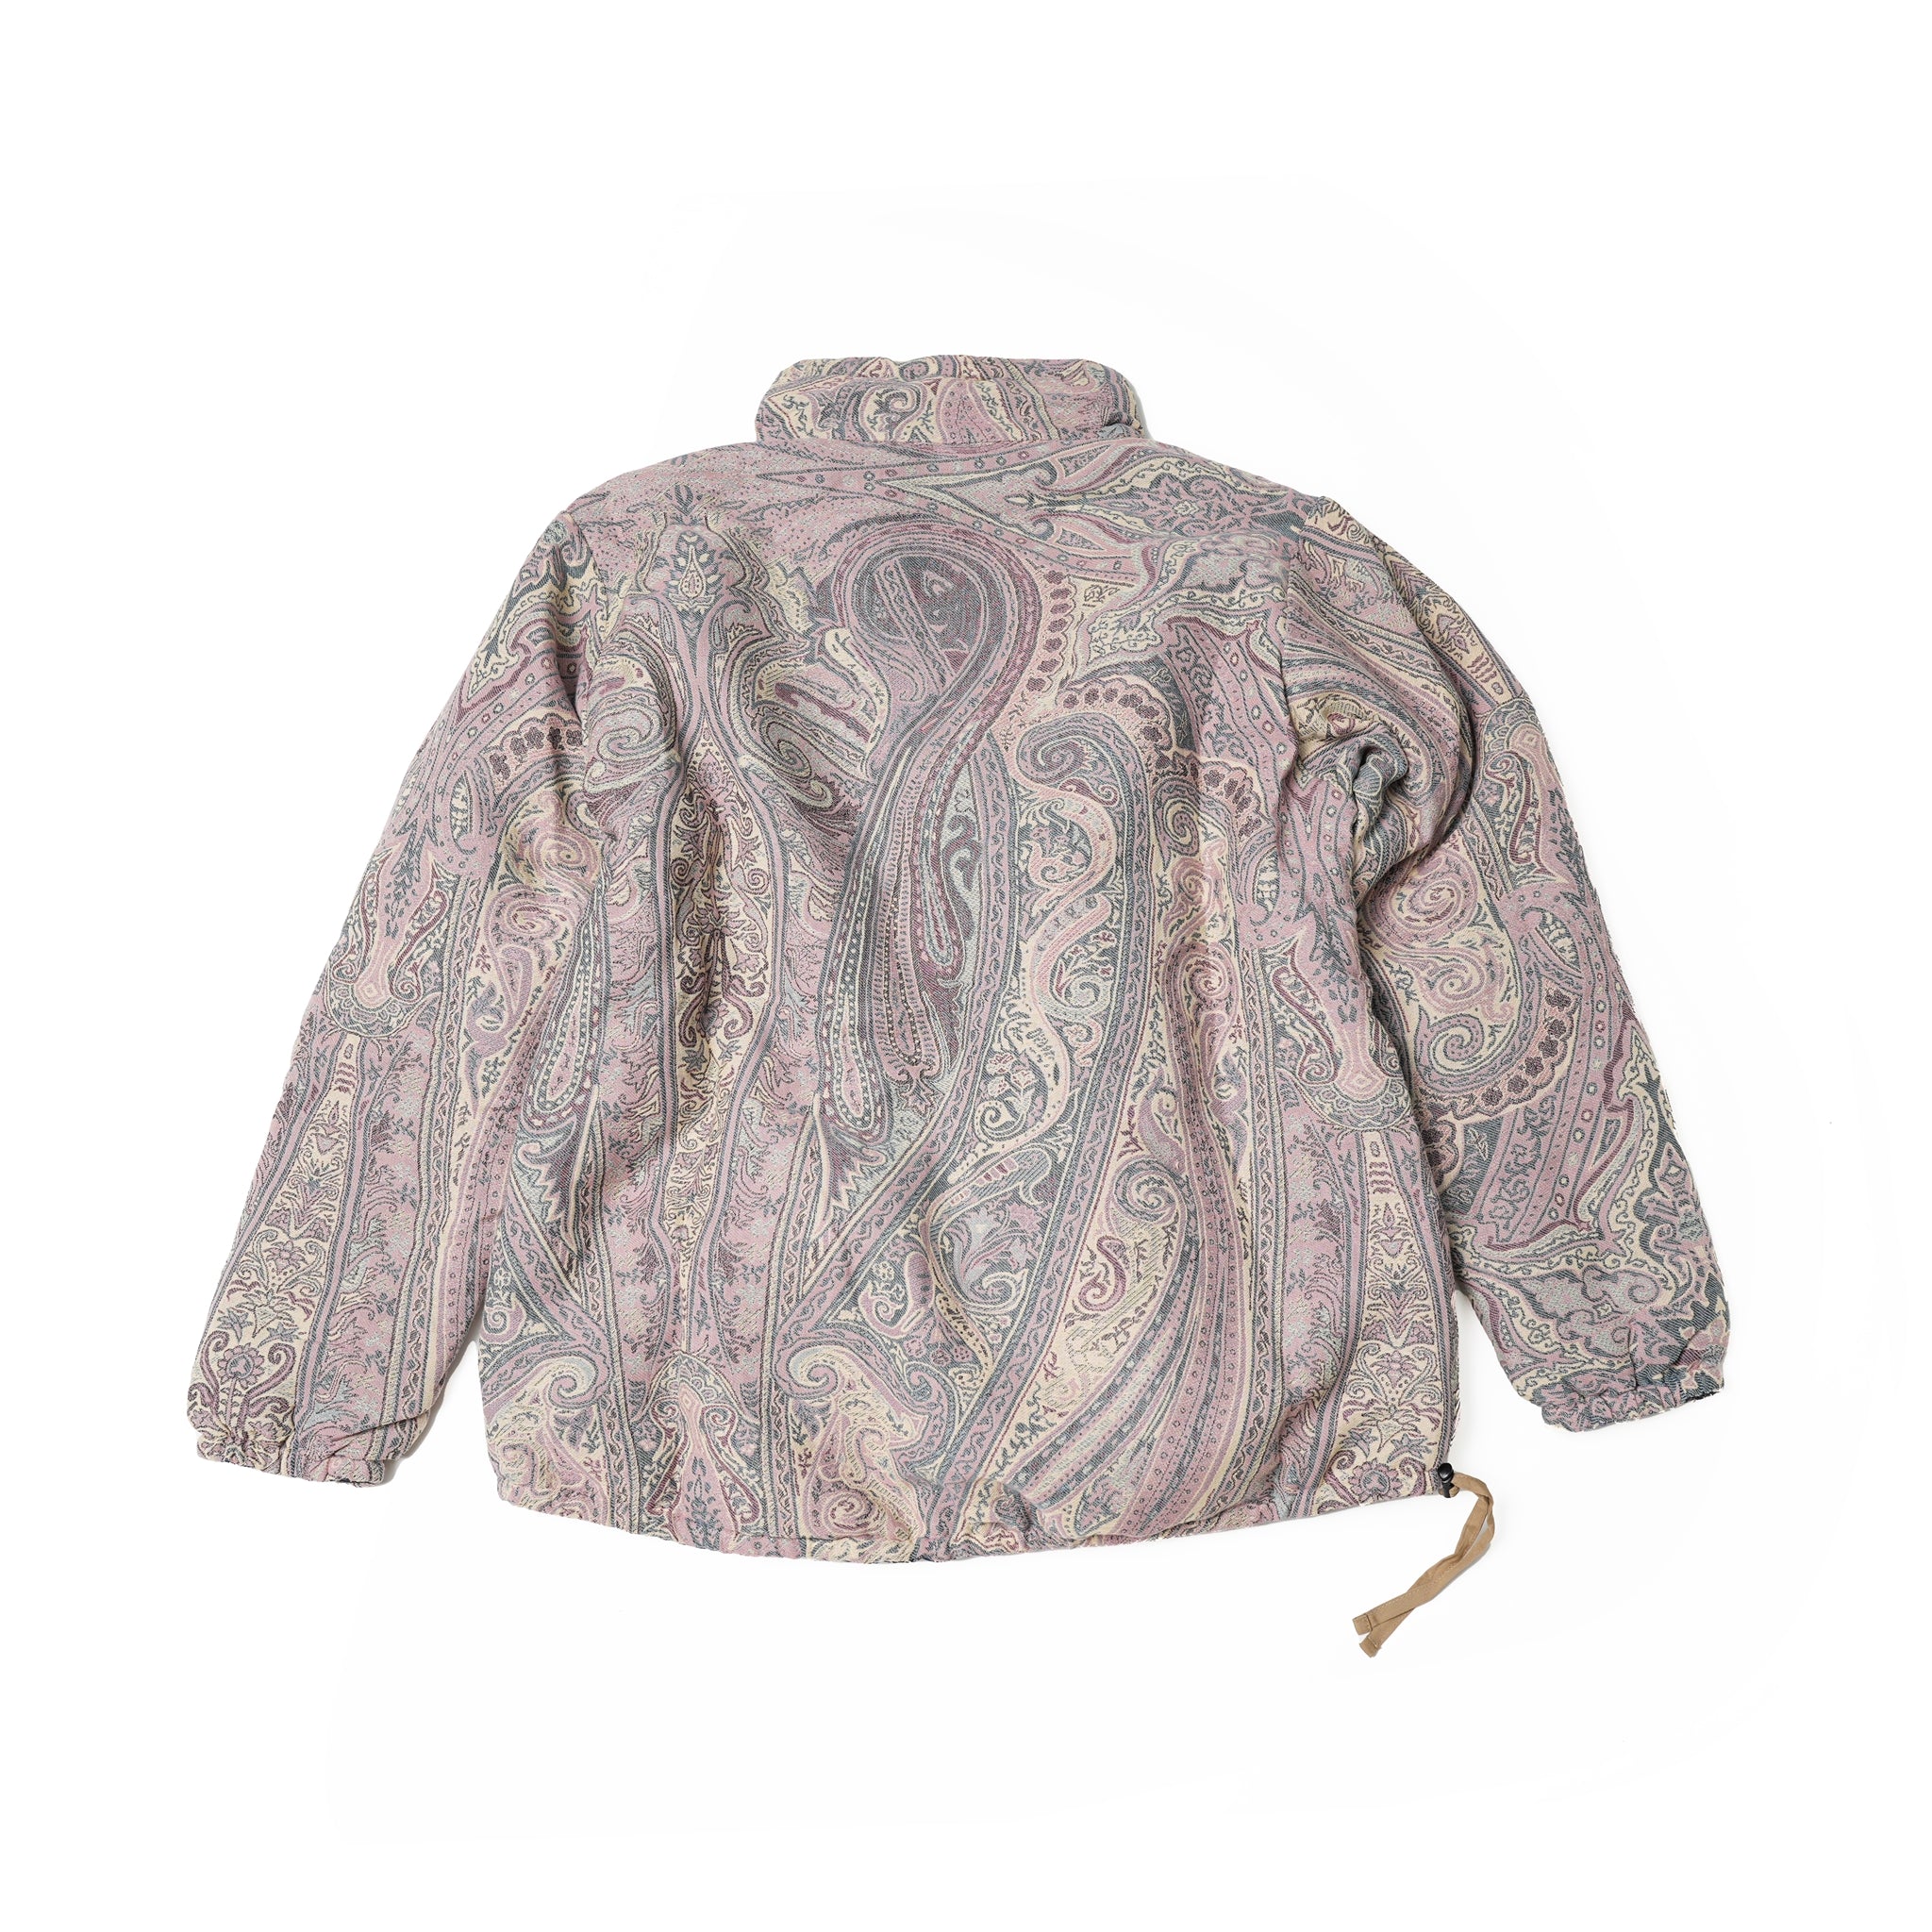 No:M32503-16 | Name:Insulated Mock Neck Pullover | Color:Betro Paisley